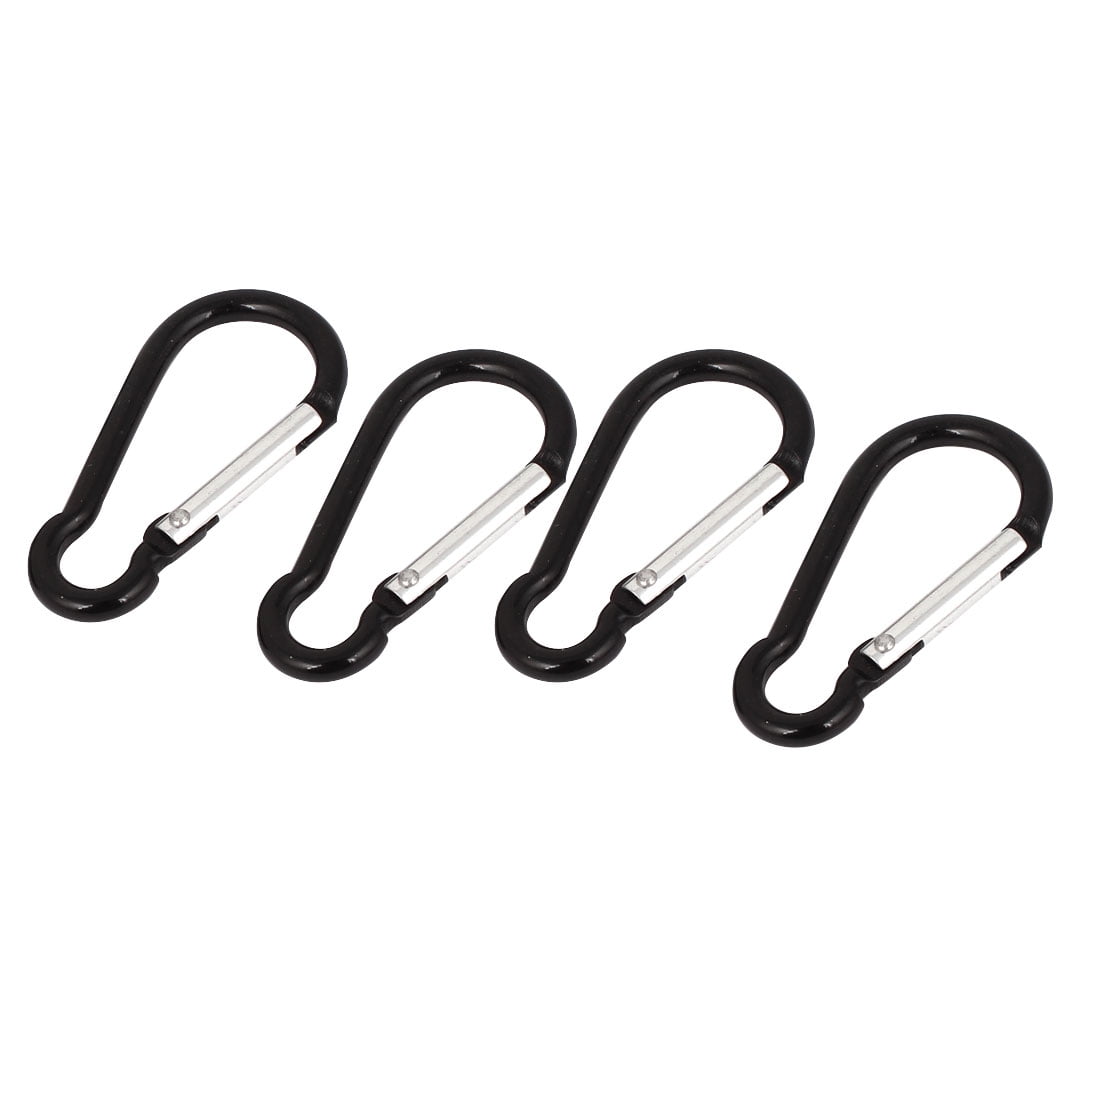 4pcs D Shape Carabiner Clip Snap Hook Key Chain for Camping Hiking black